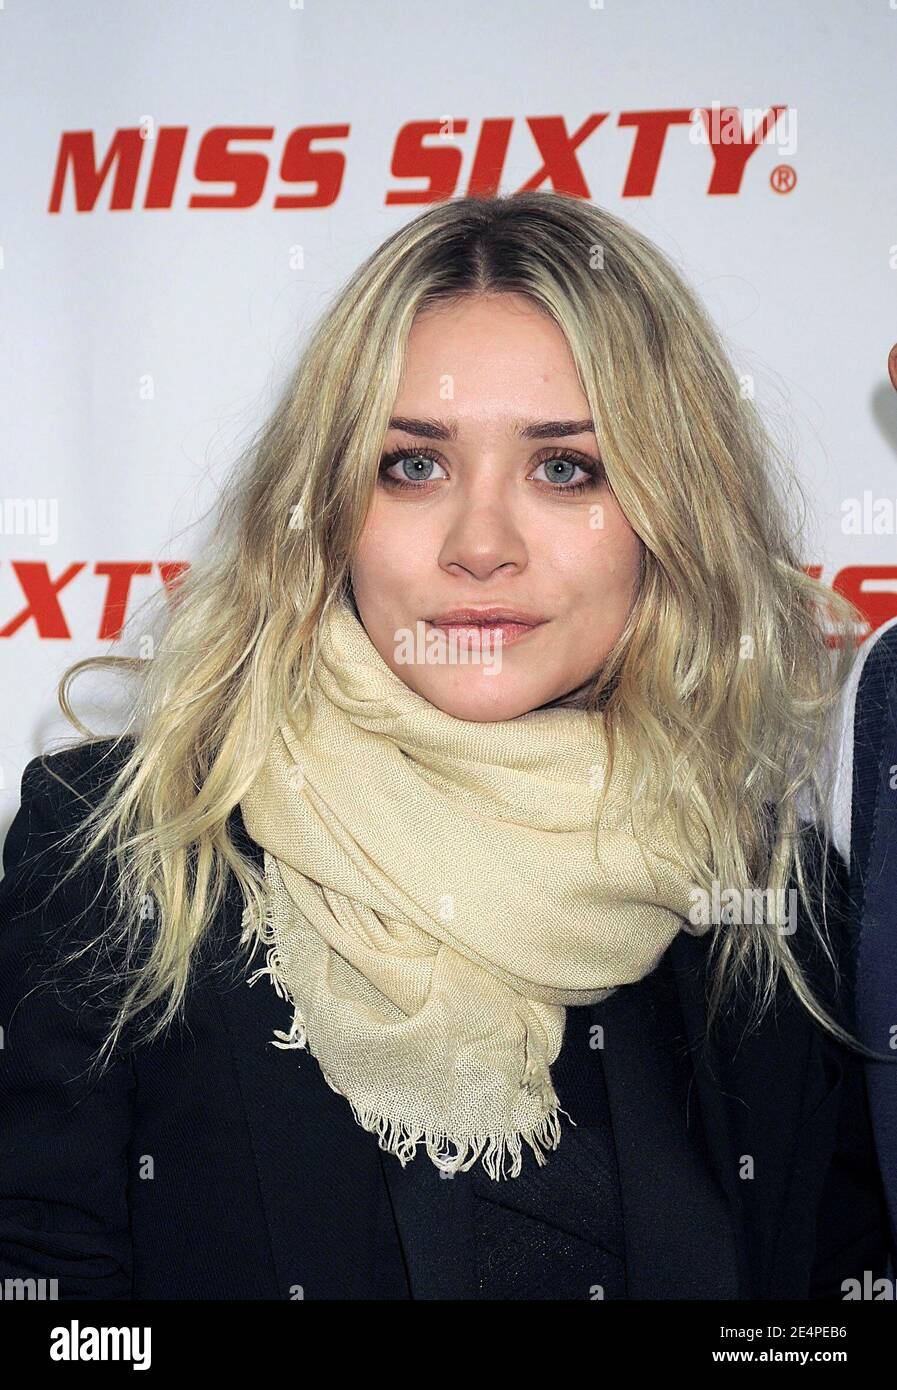 Ashley Olsen backstage at the Miss Sixty Fall 2008 Collection show during  Mercedes Benz Fashion Week, held in Bryant Park in New York City, NY, USA  on Sunday, February 3, 2008. Photo